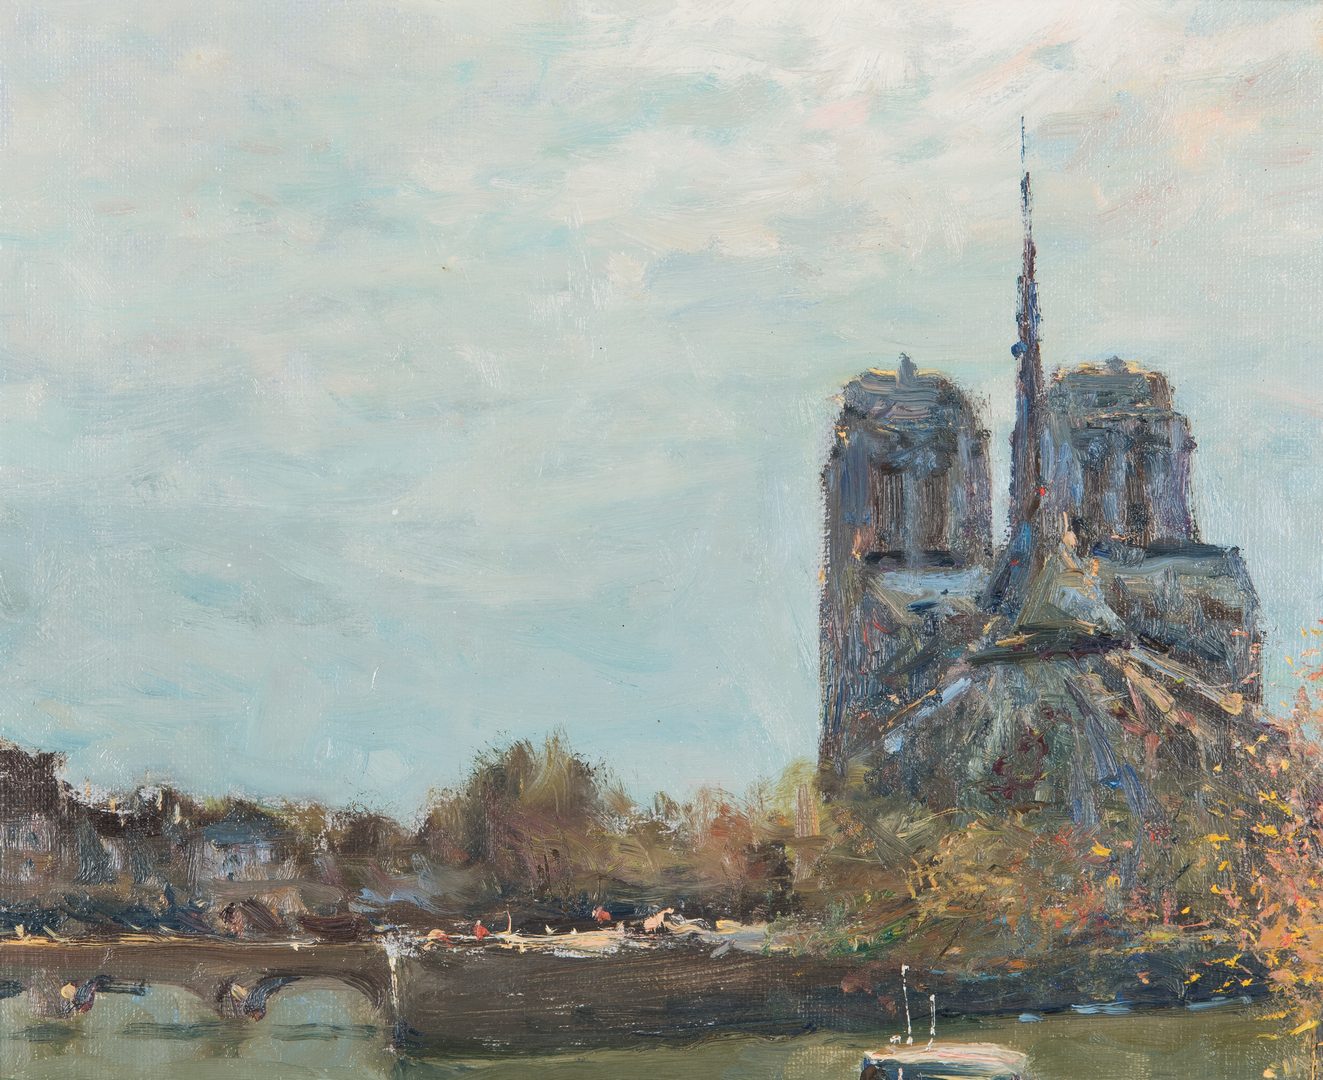 Lot 309: Jean Kevorkian O/C, Paris Canal with Notre Dame